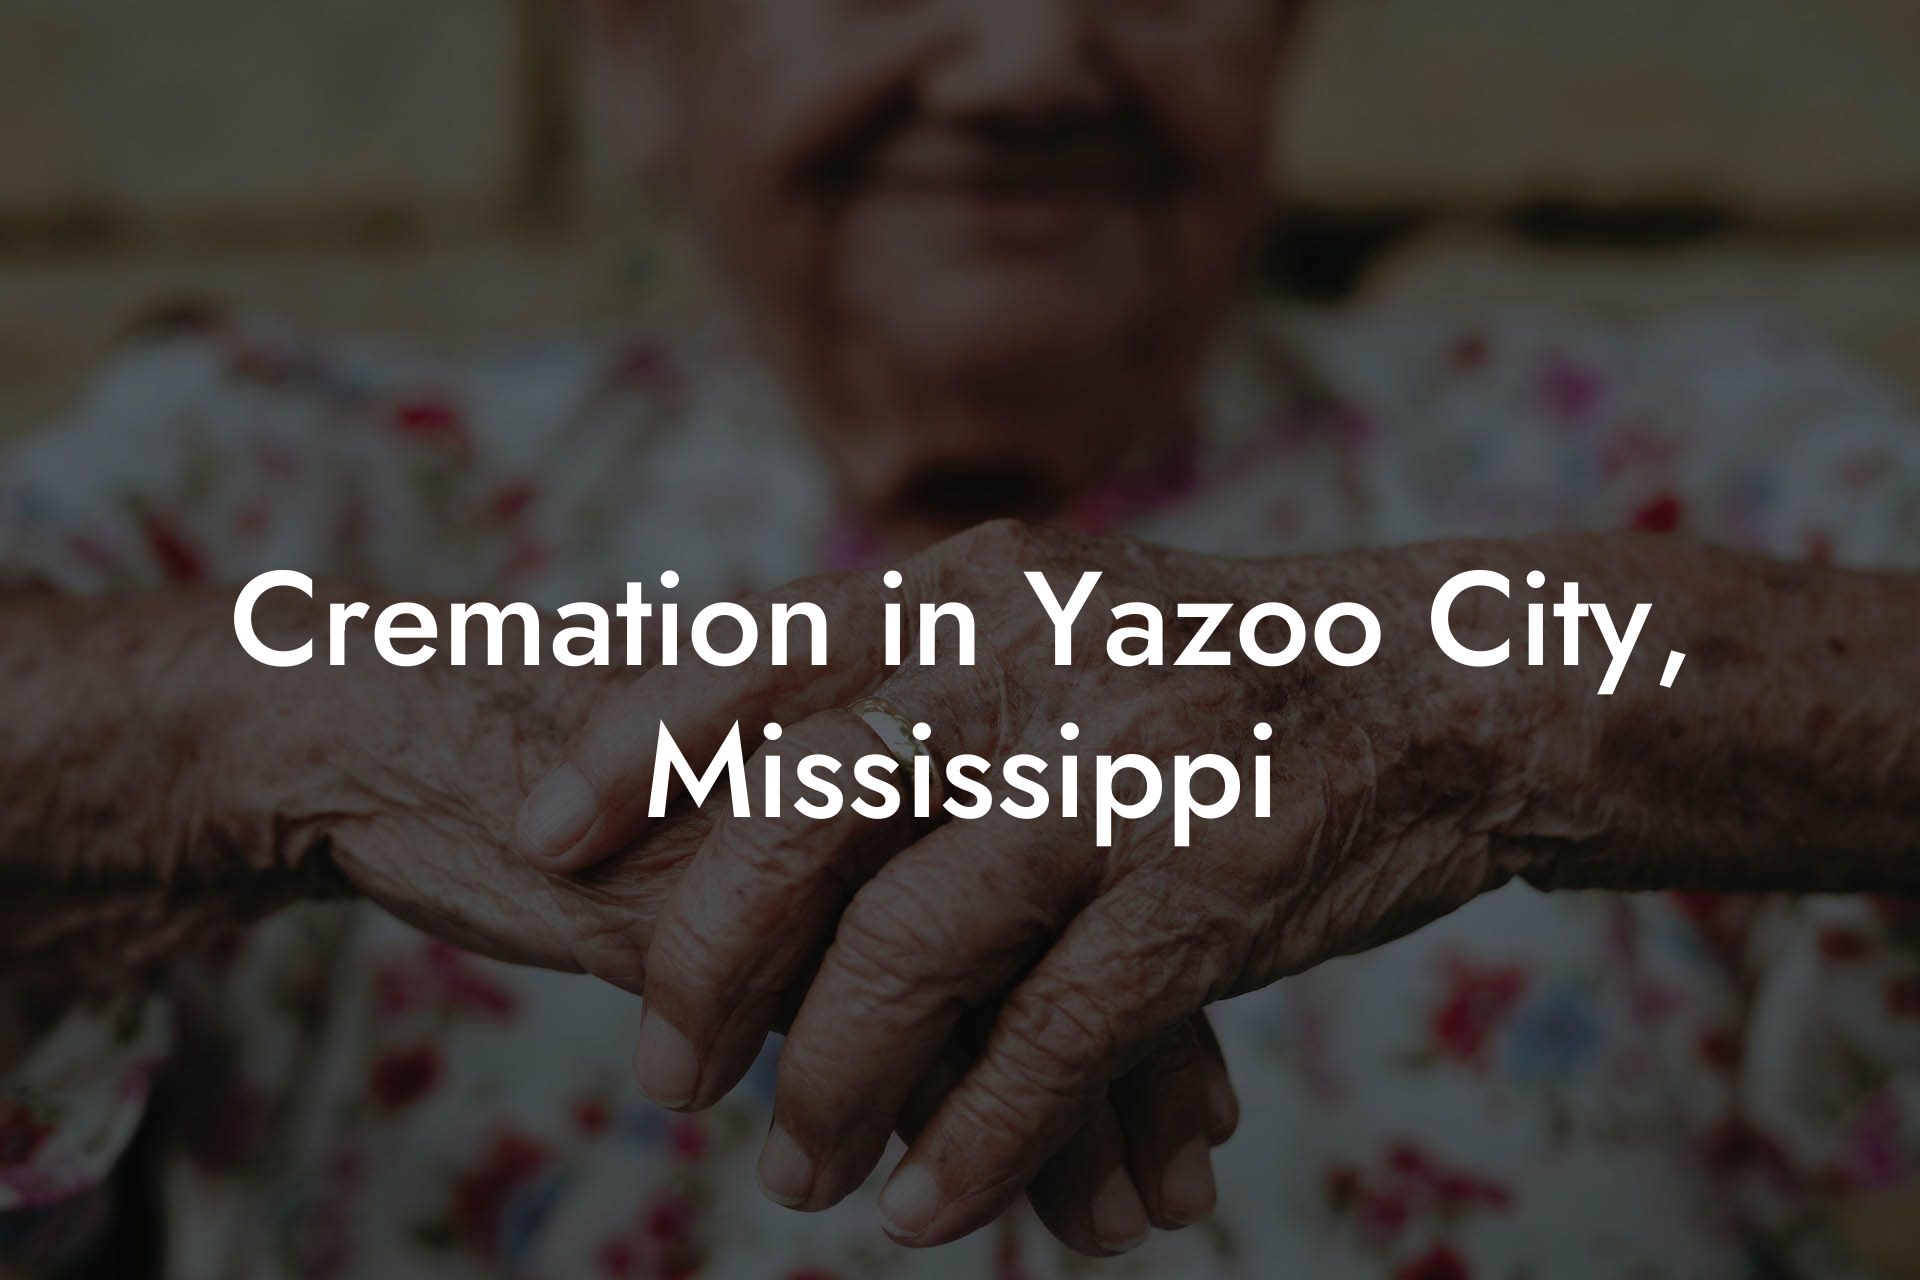 Cremation in Yazoo City, Mississippi